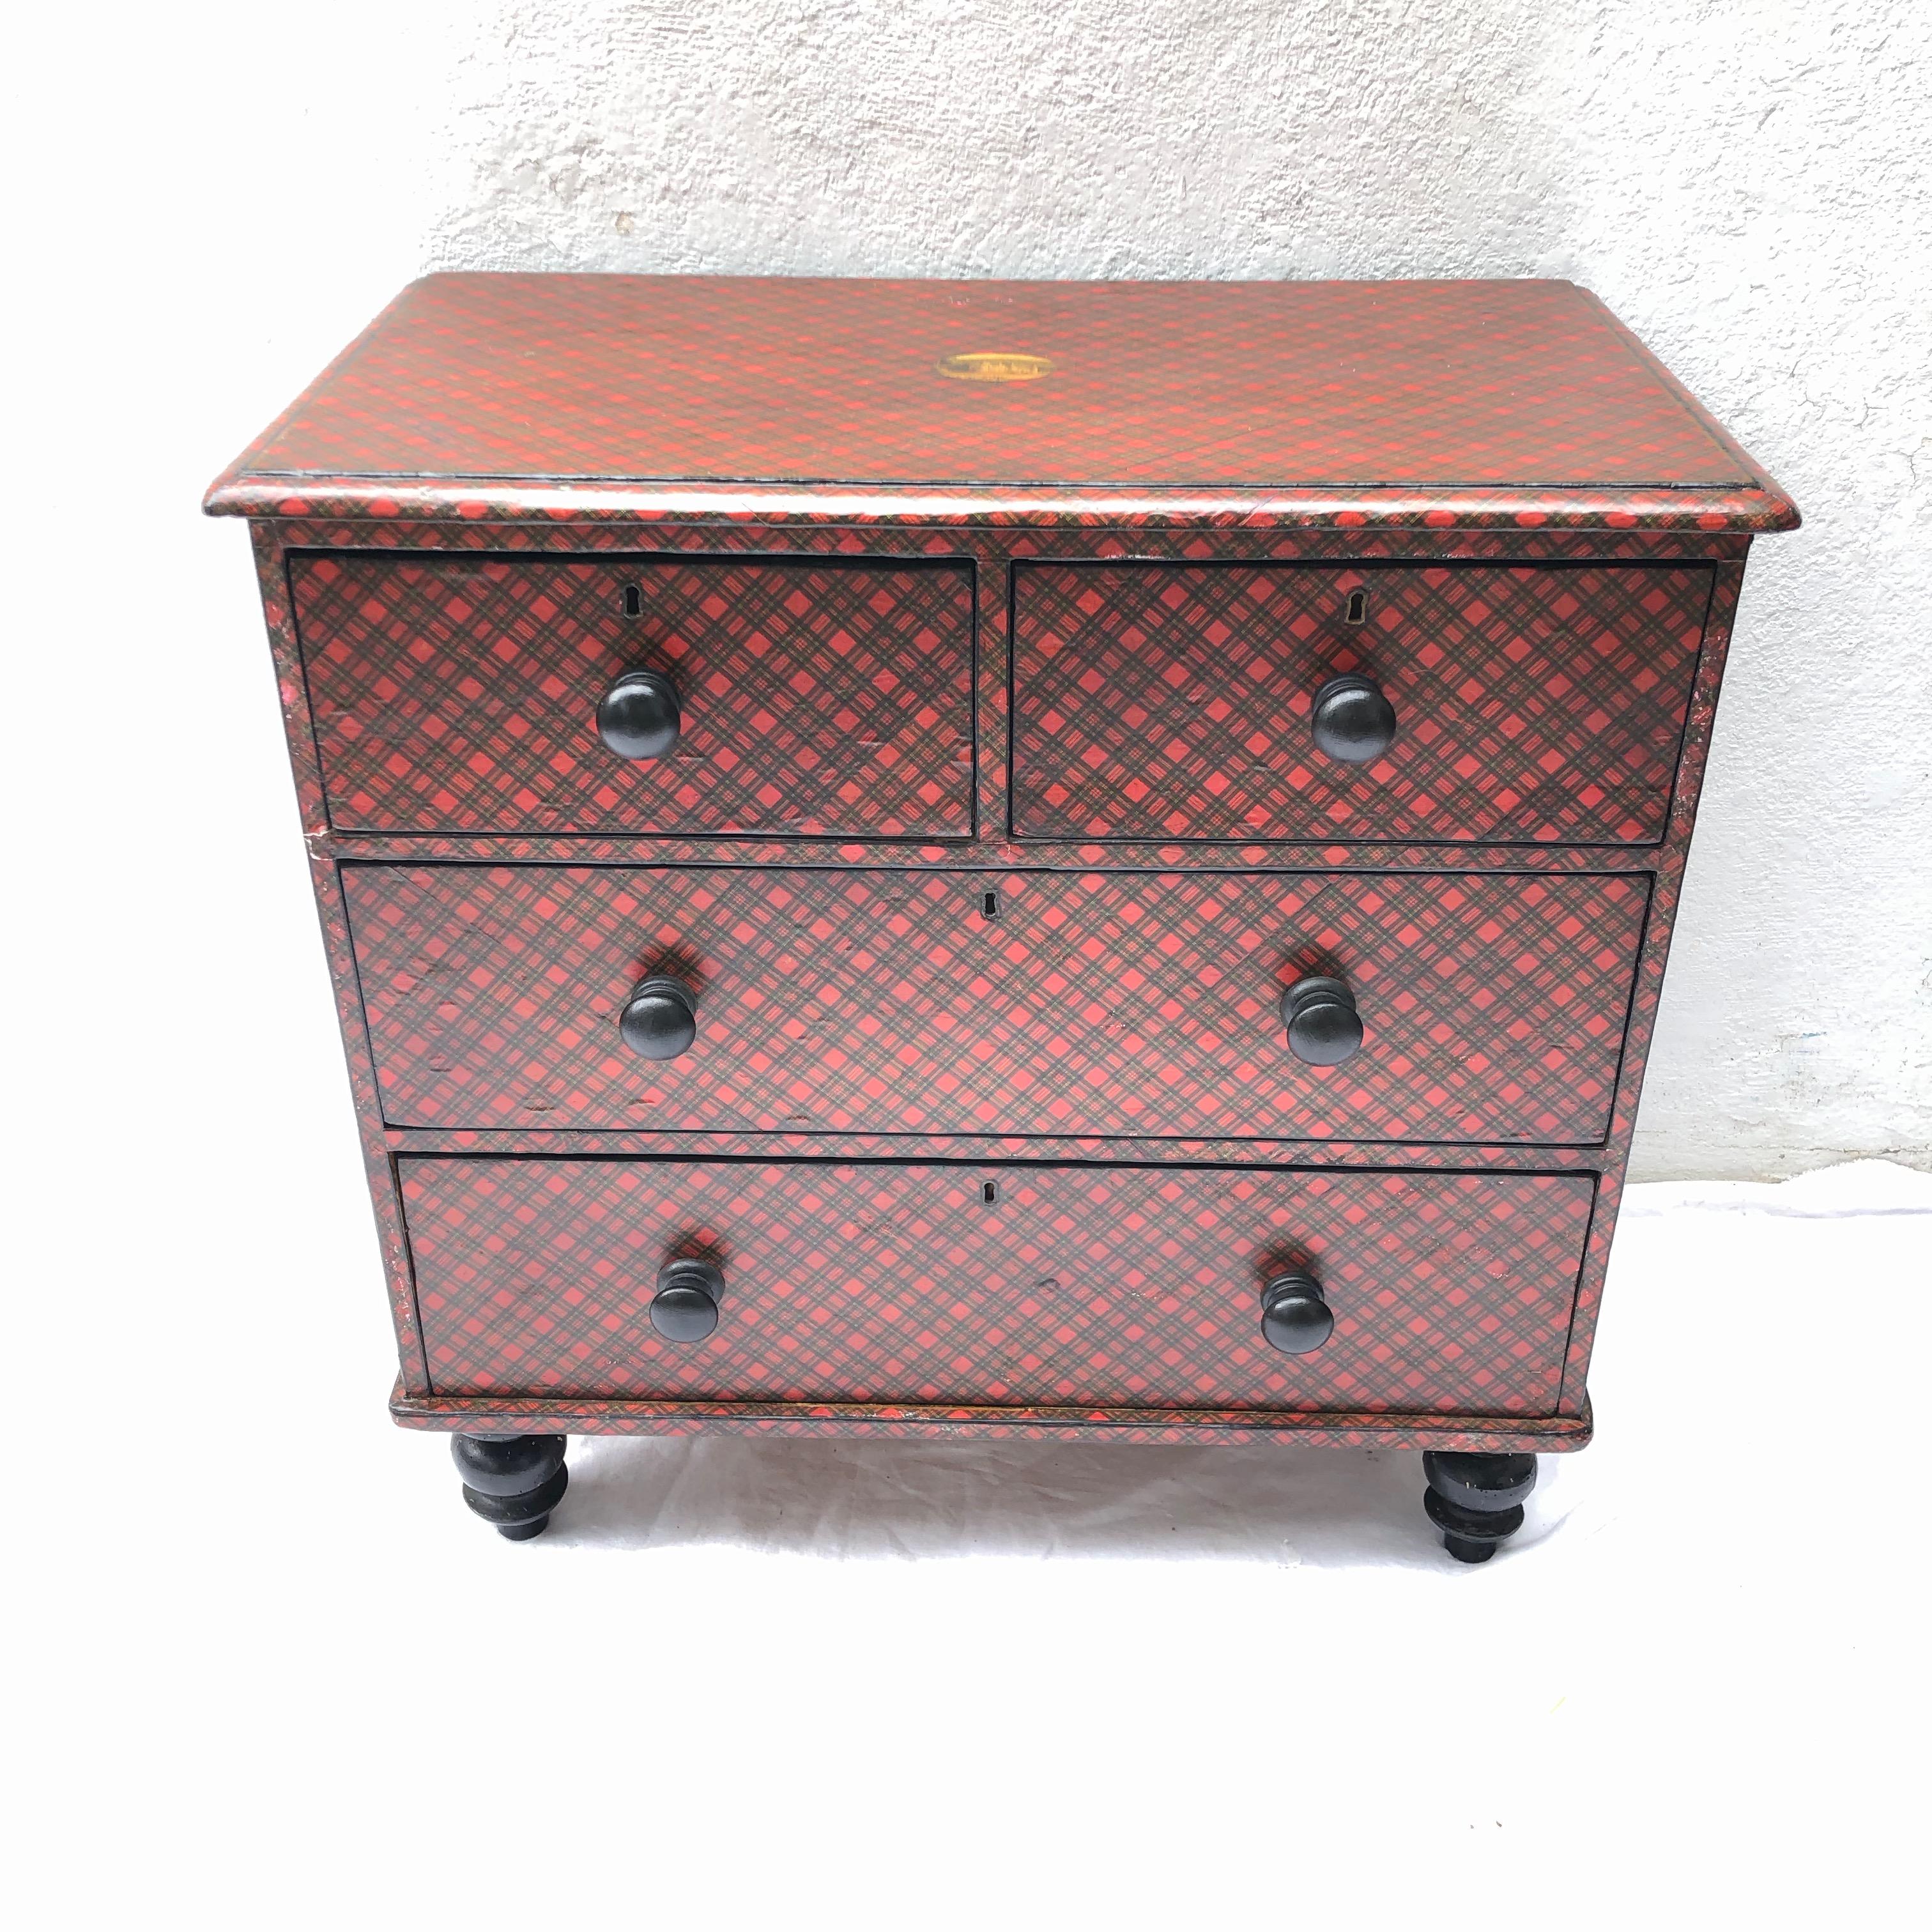 Late 19th century Victorian Tartanware painted black and decoupage chest of drawers.